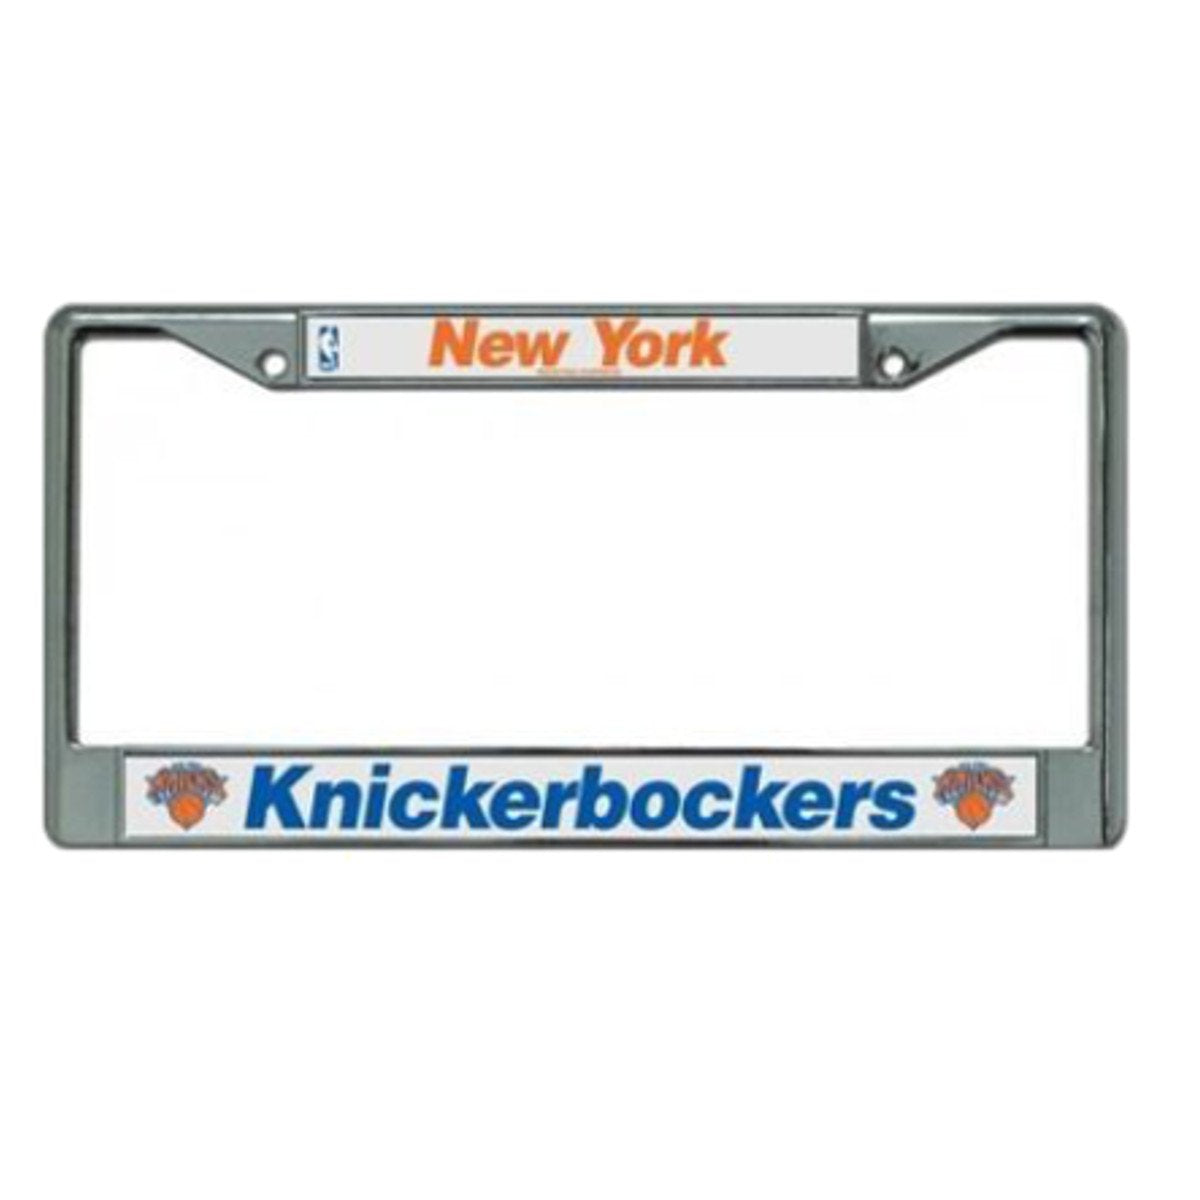 NBA Official Shop Authentic Chrome License Plate Frame and Matching Colored Auto Emblem (New York Knicks)